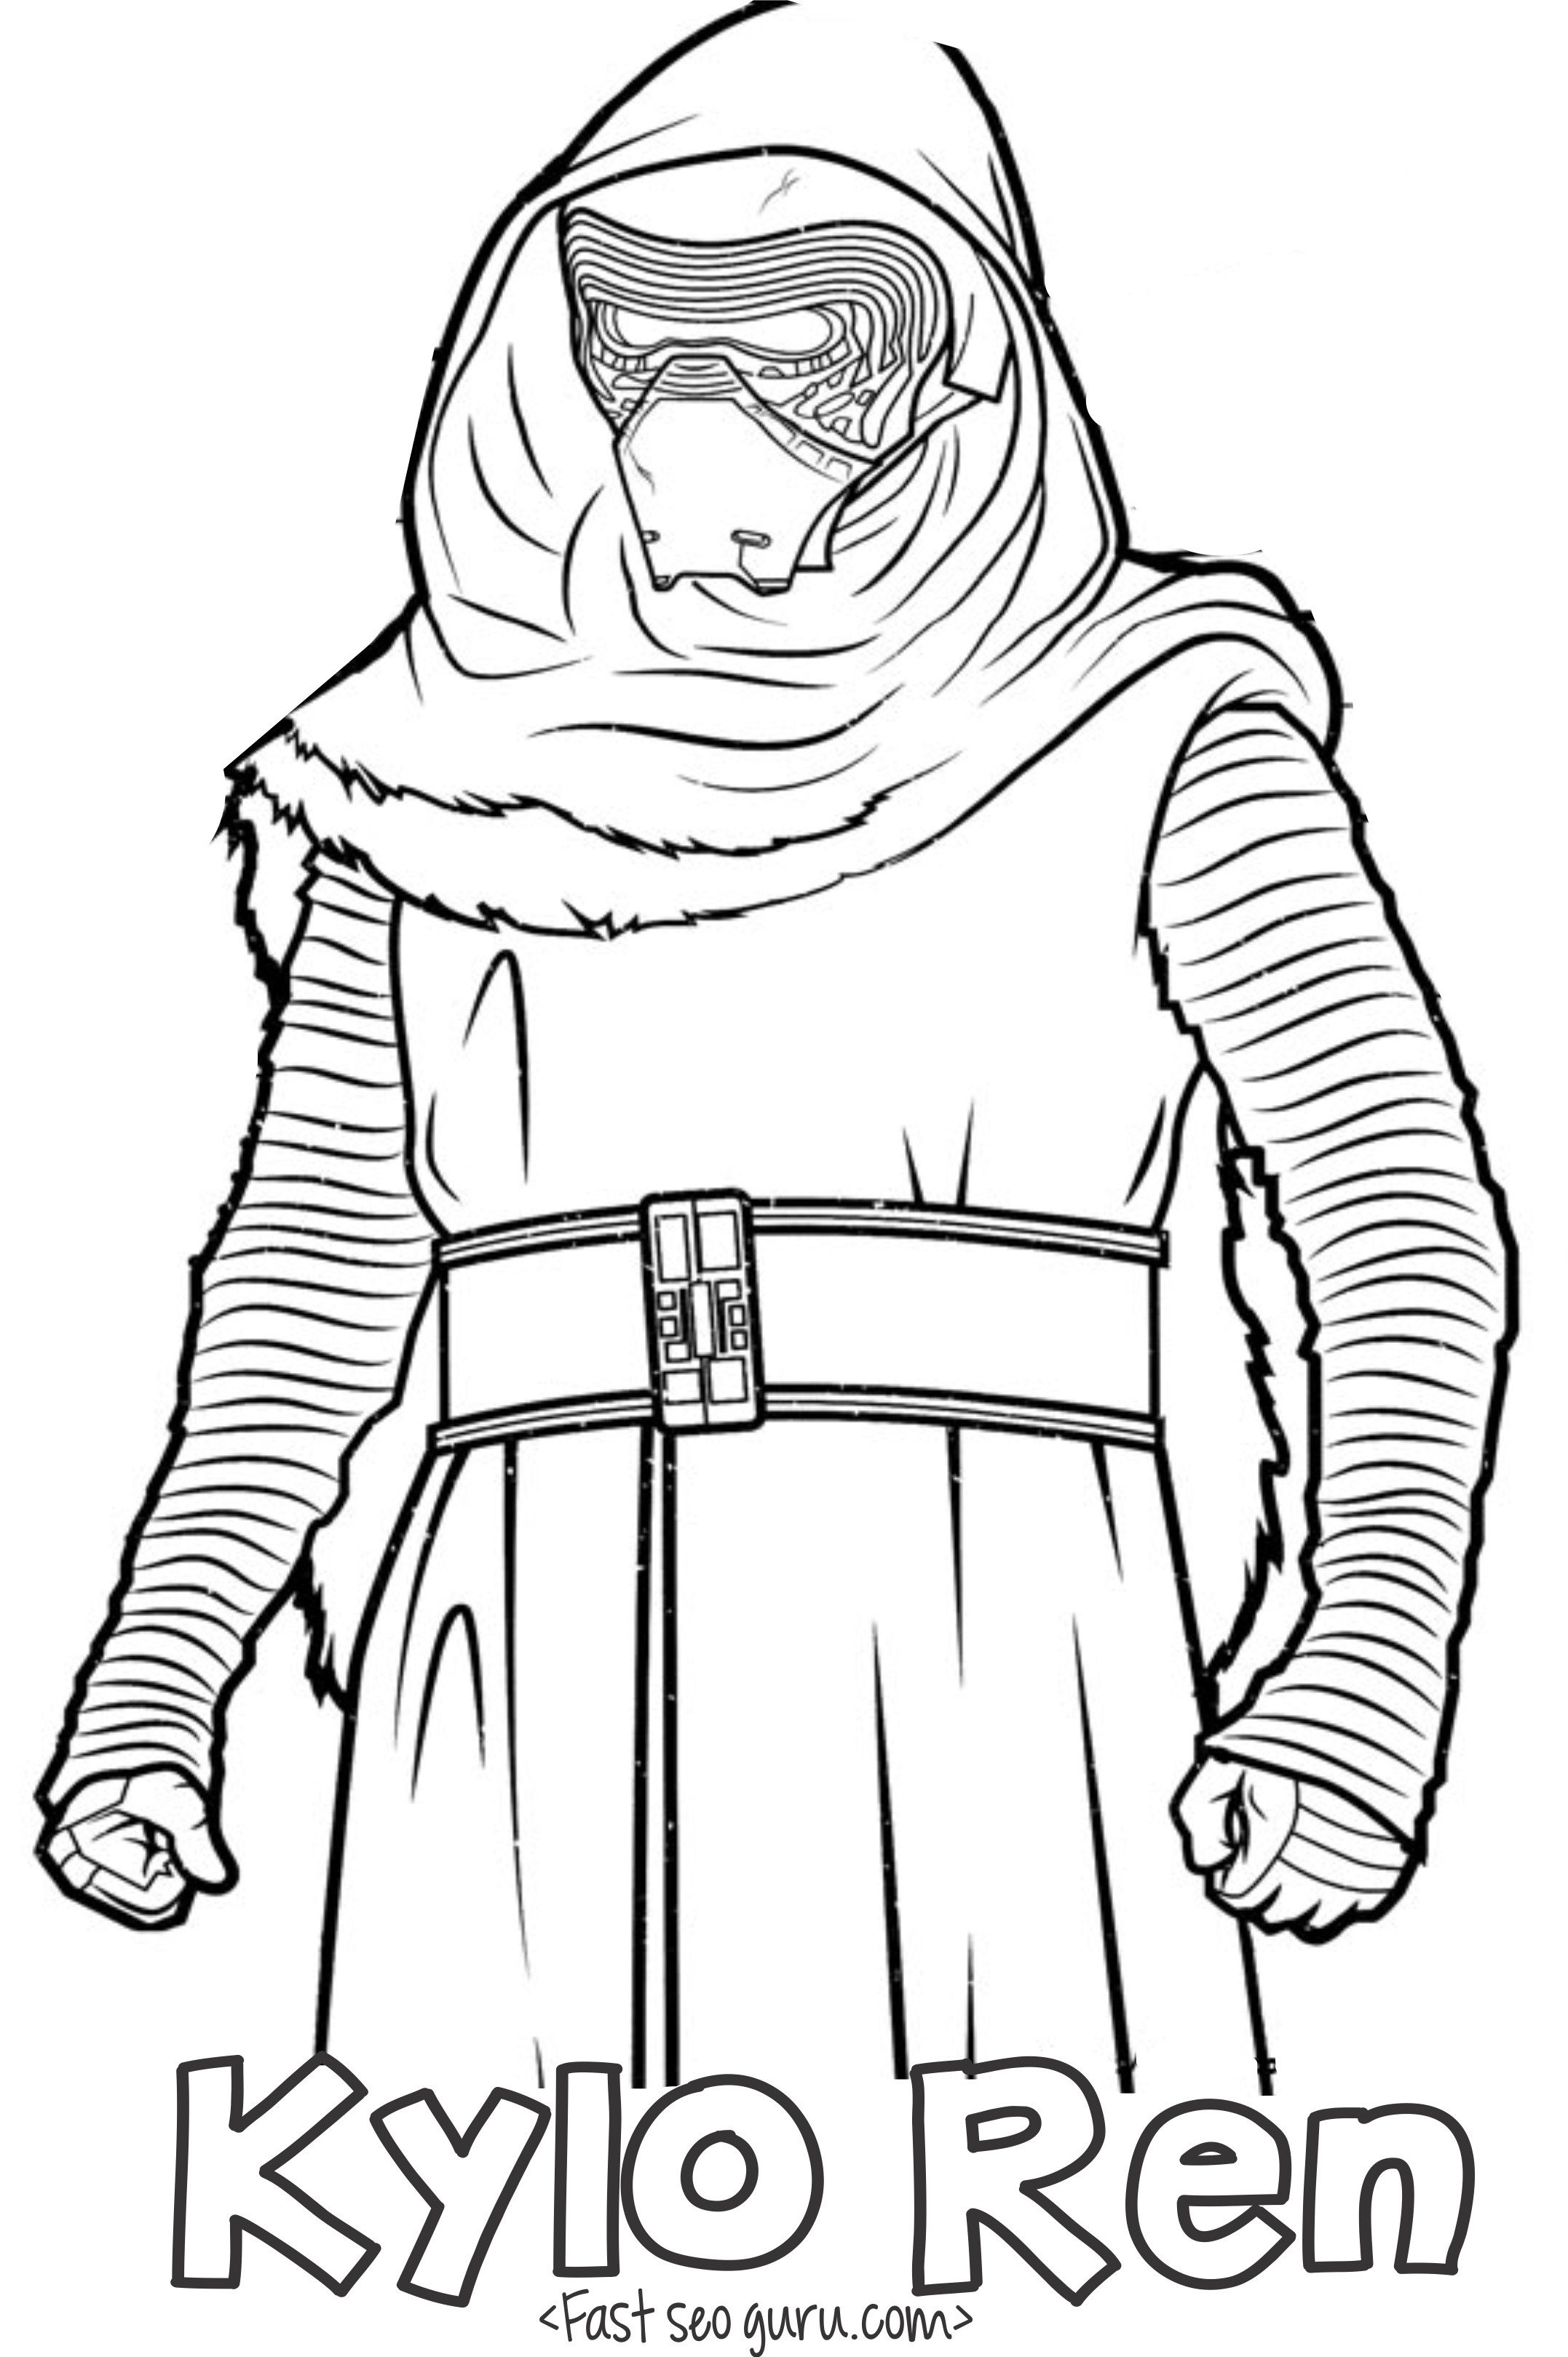 Kylo Ren Coloring Pages
 Kylo Ren Coloring Pages Coloring Pages